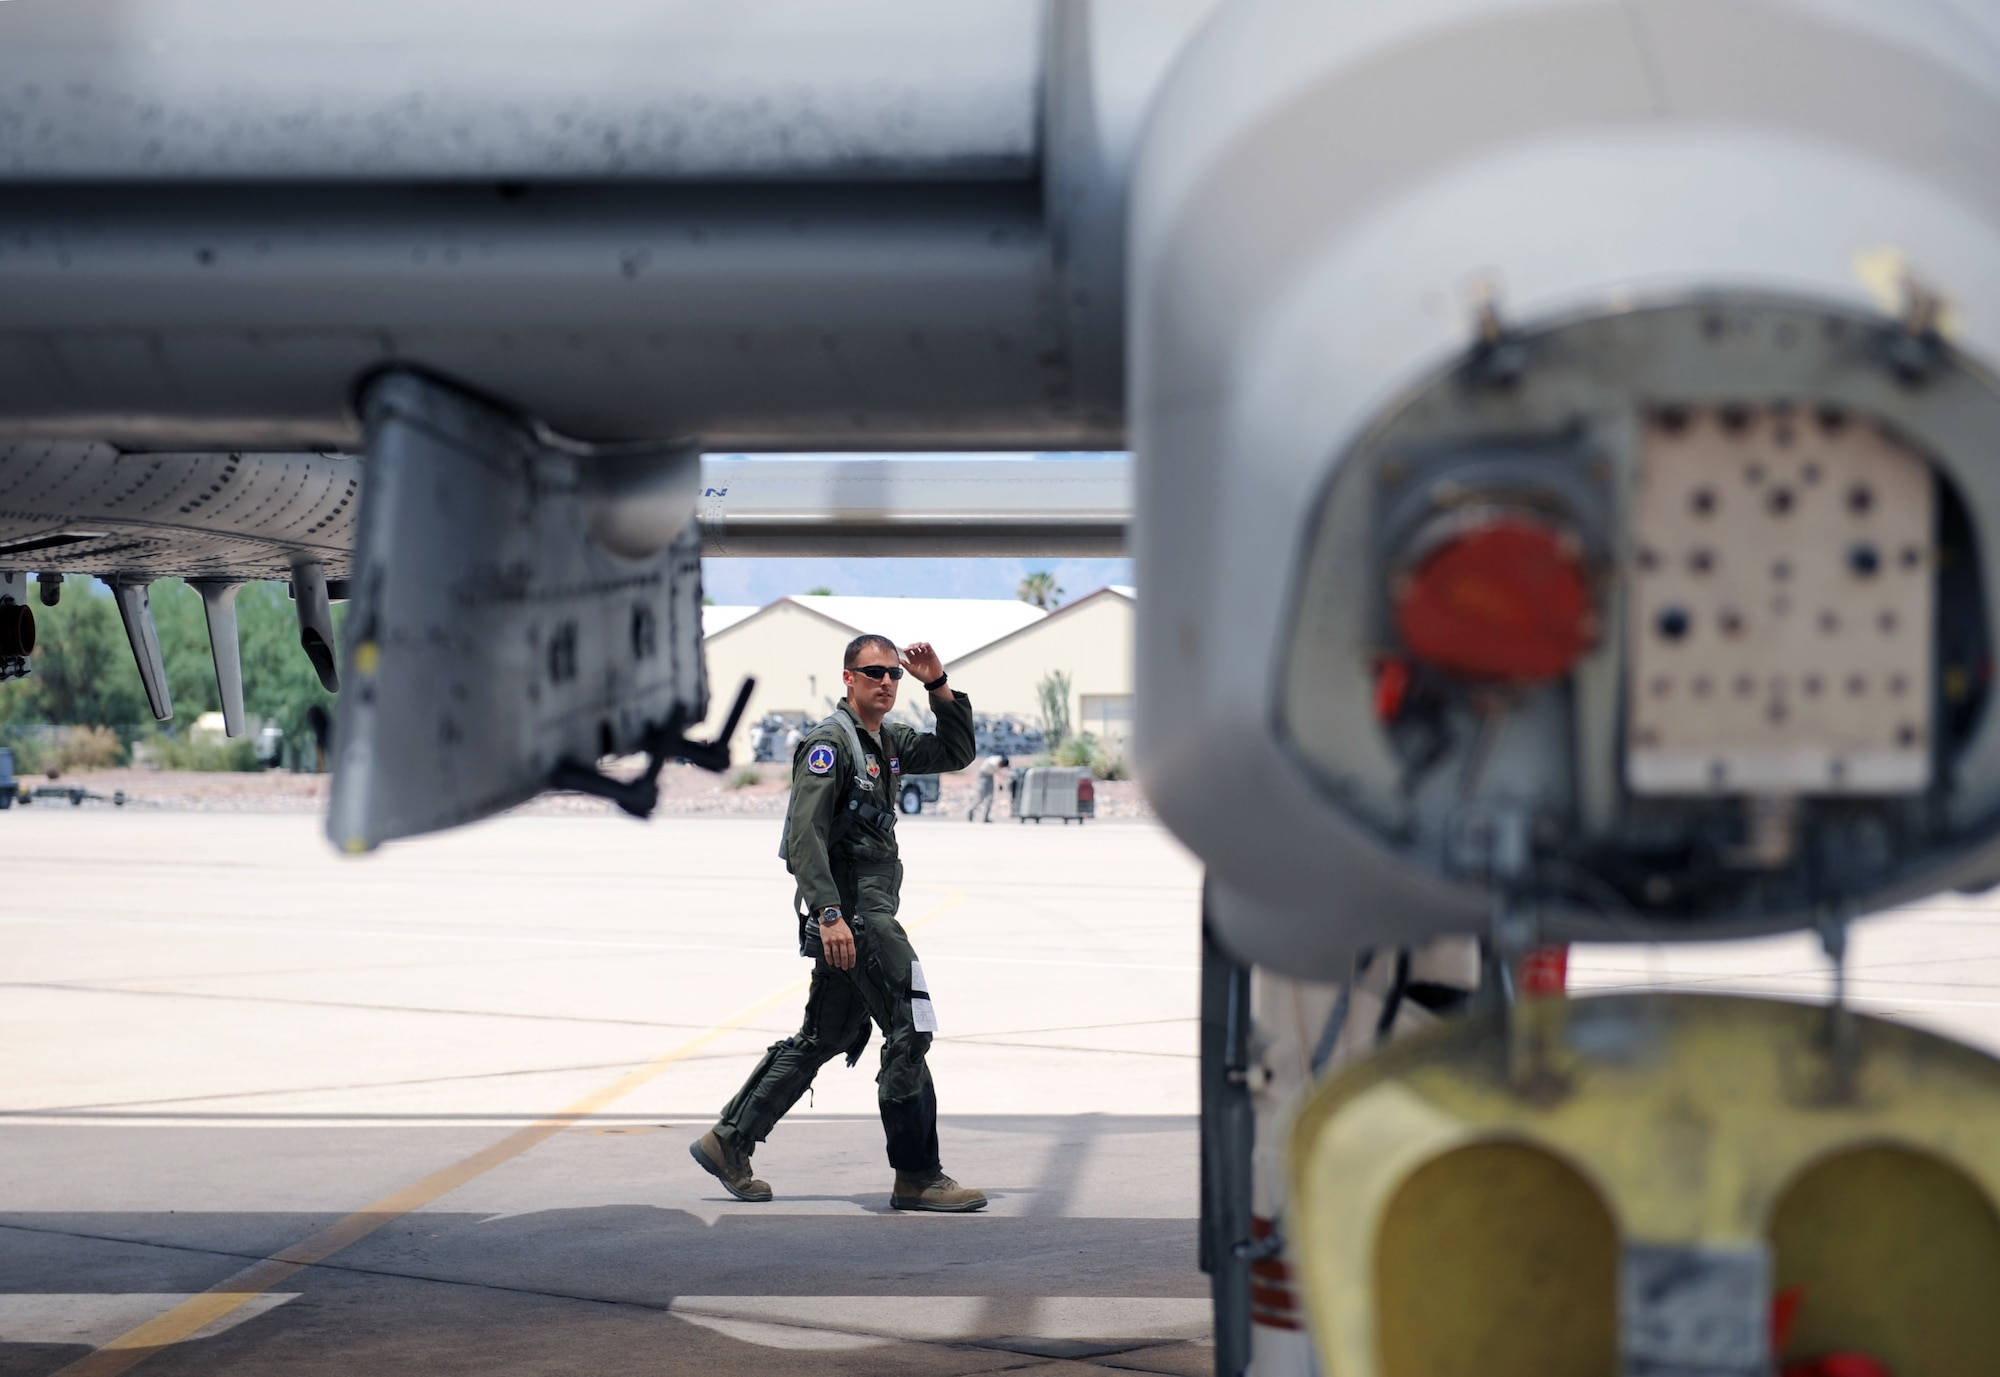 1st Lt. Pete Matthews, 354th Fighter Squadron fighter pilot, performs pre-flight checks on his A-10 on the flightline at Davis-Monthan Air Force Base, Ariz., July 17, 2013. The 354th FS recently returned to flying after being grounded for three months due to sequestration. (U.S. Air Force photo by Airman 1st Class Saphfire Cook/Released)